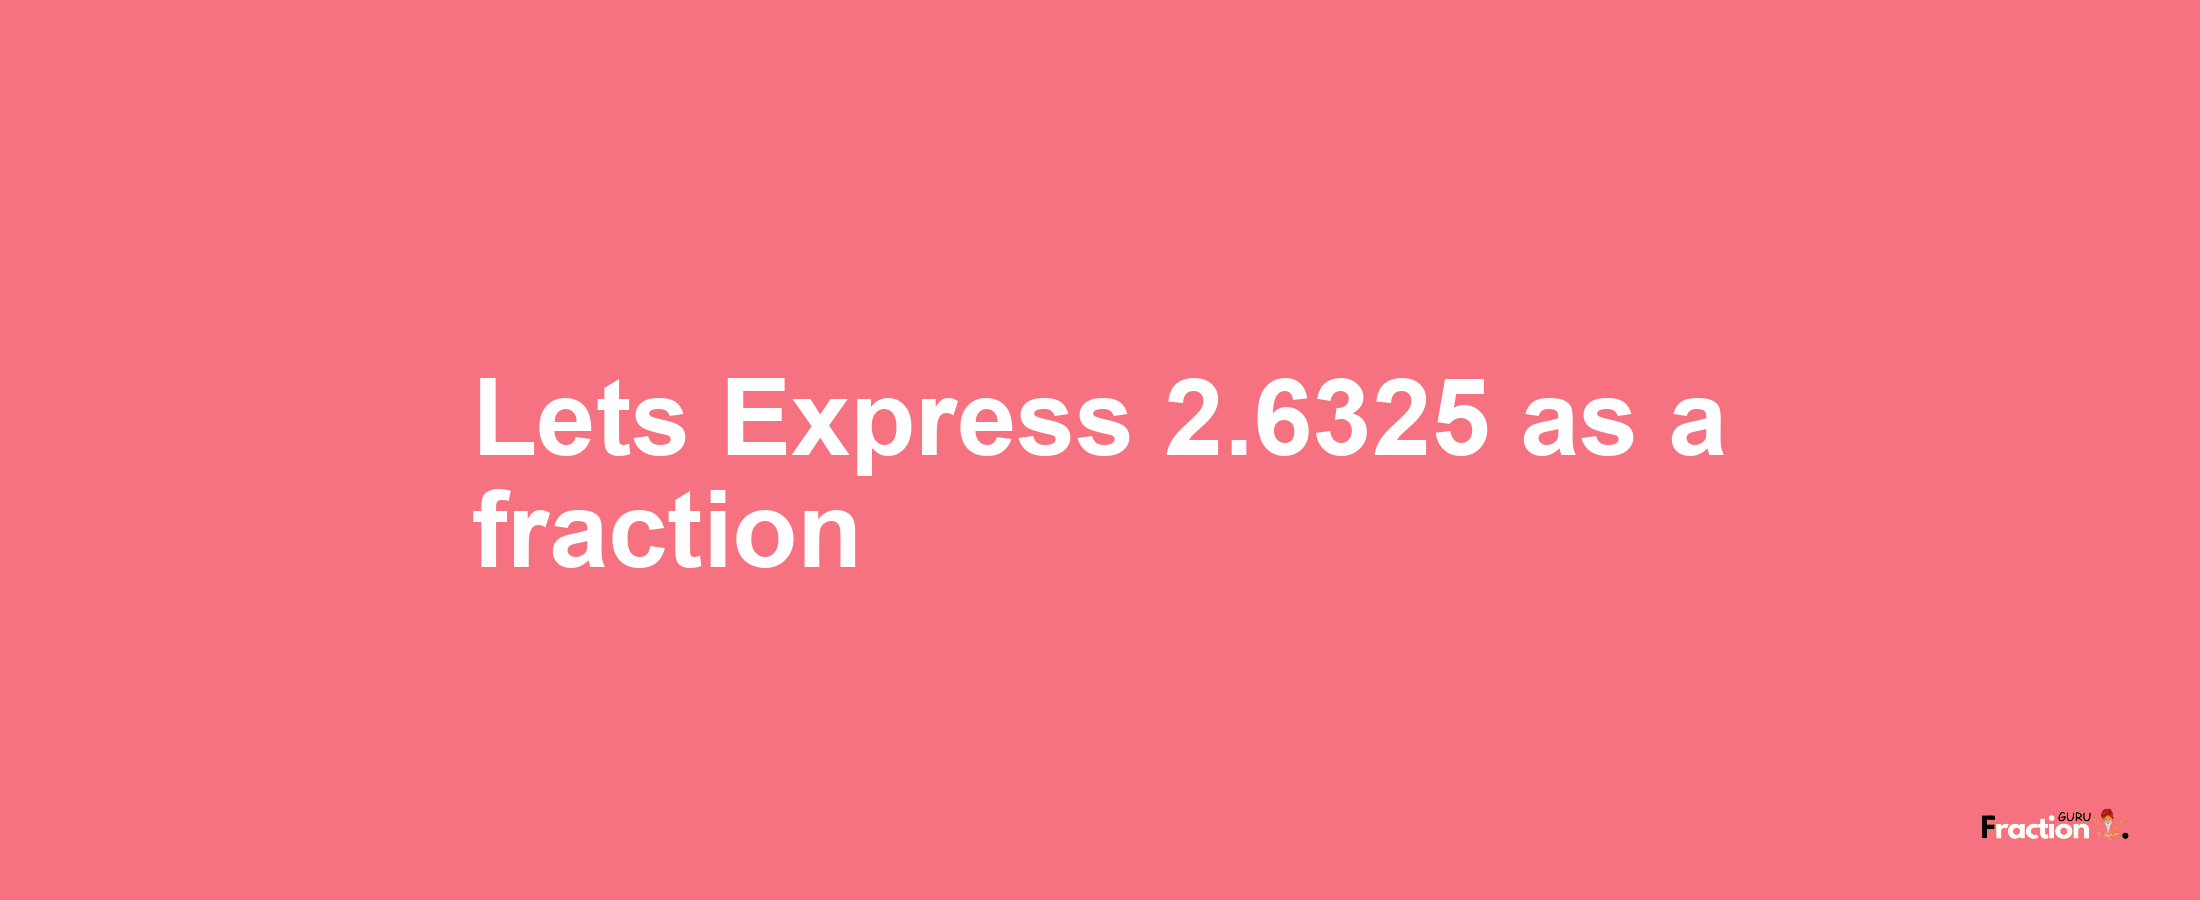 Lets Express 2.6325 as afraction